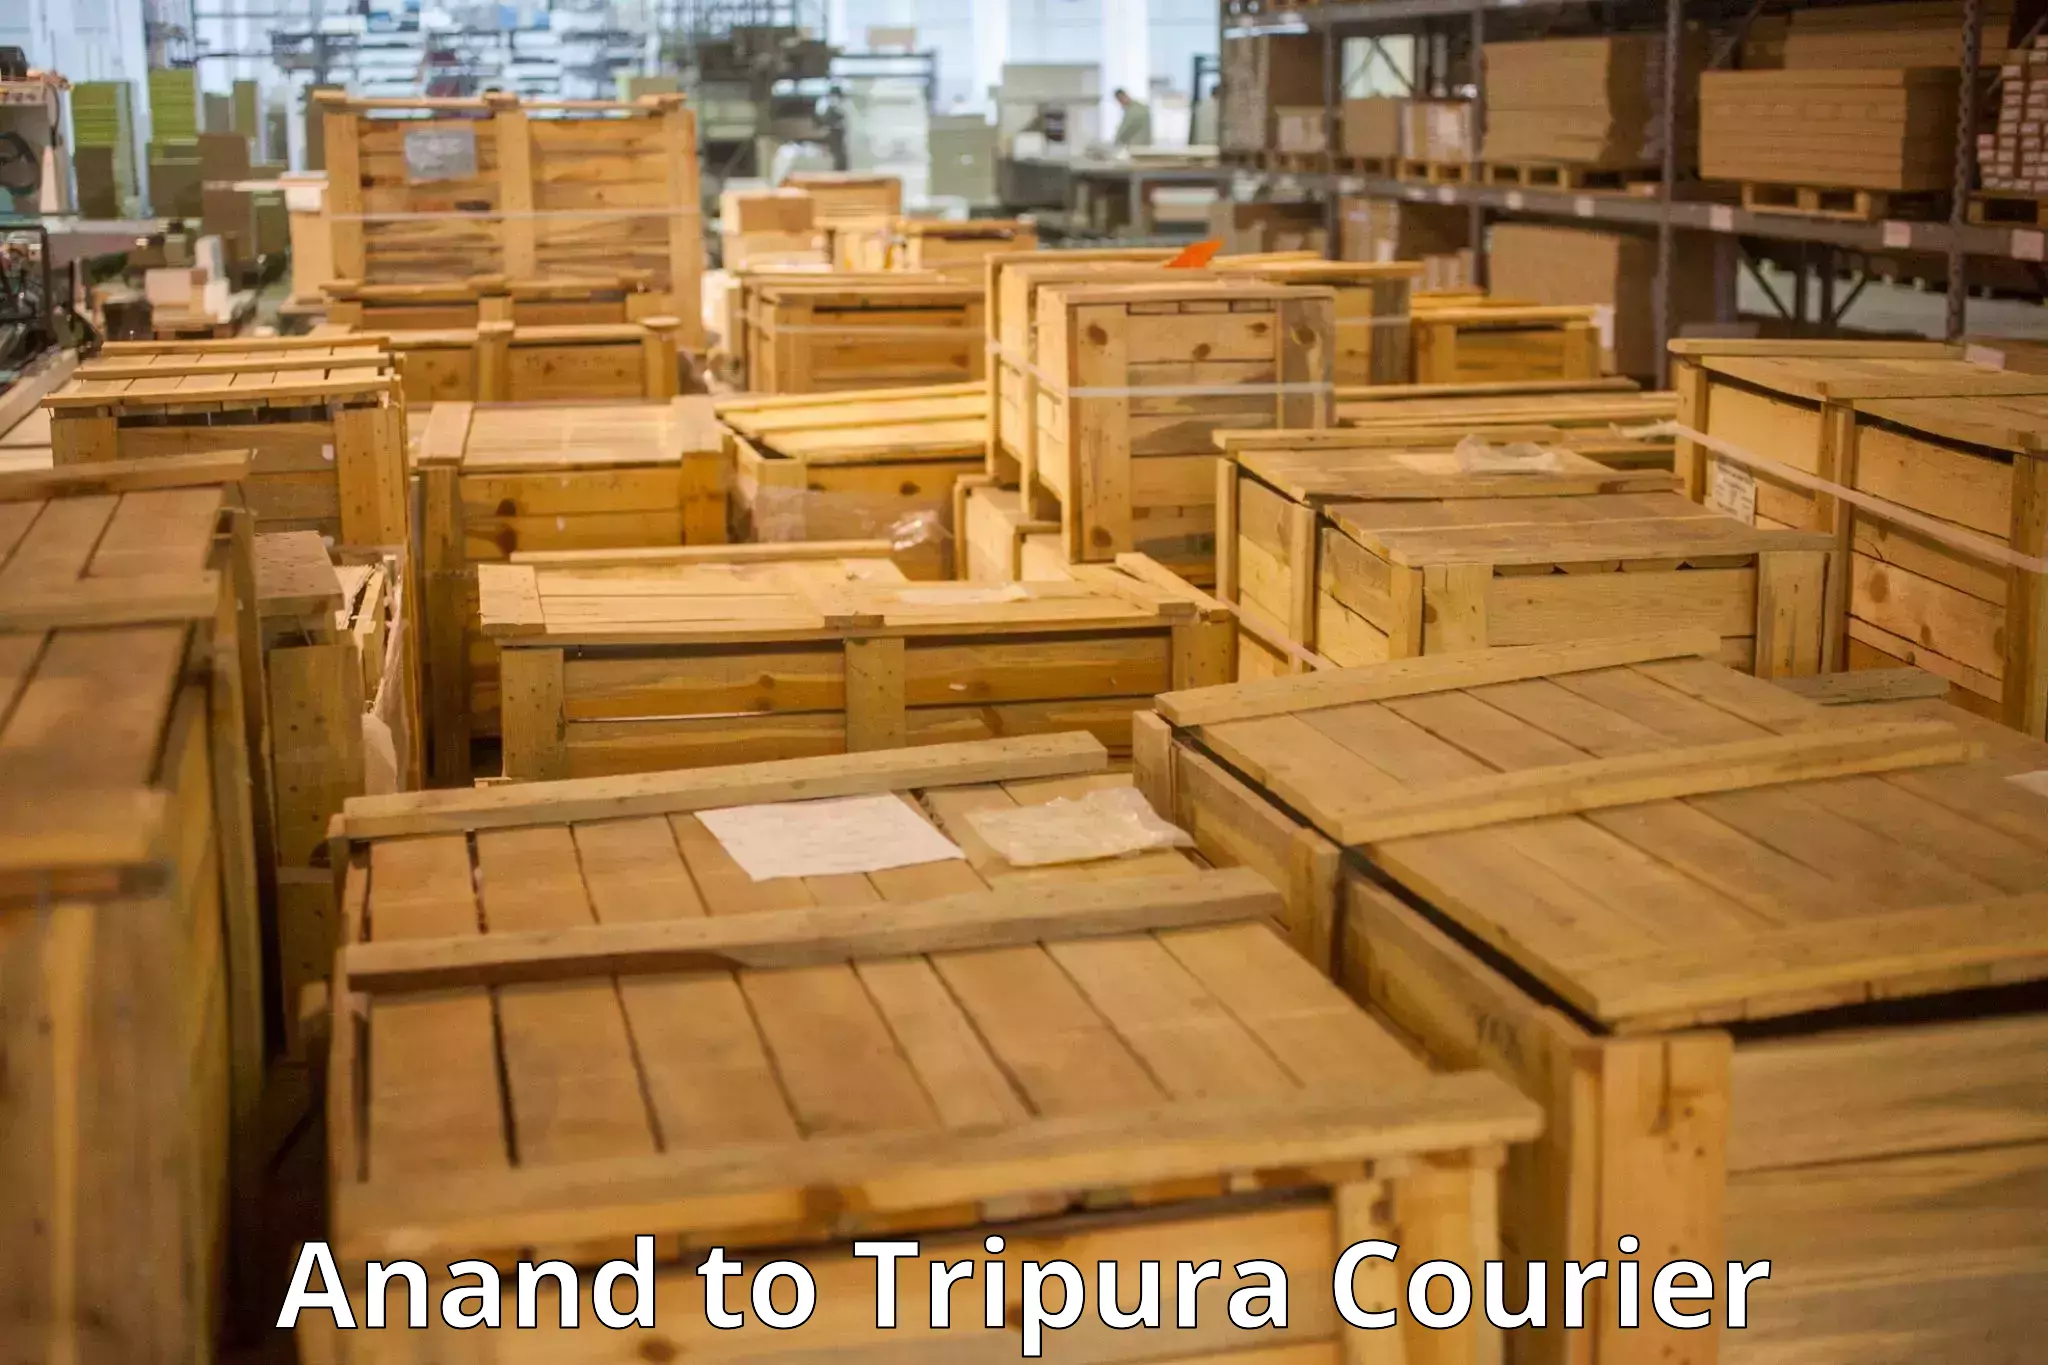 Baggage transport management Anand to Udaipur Tripura